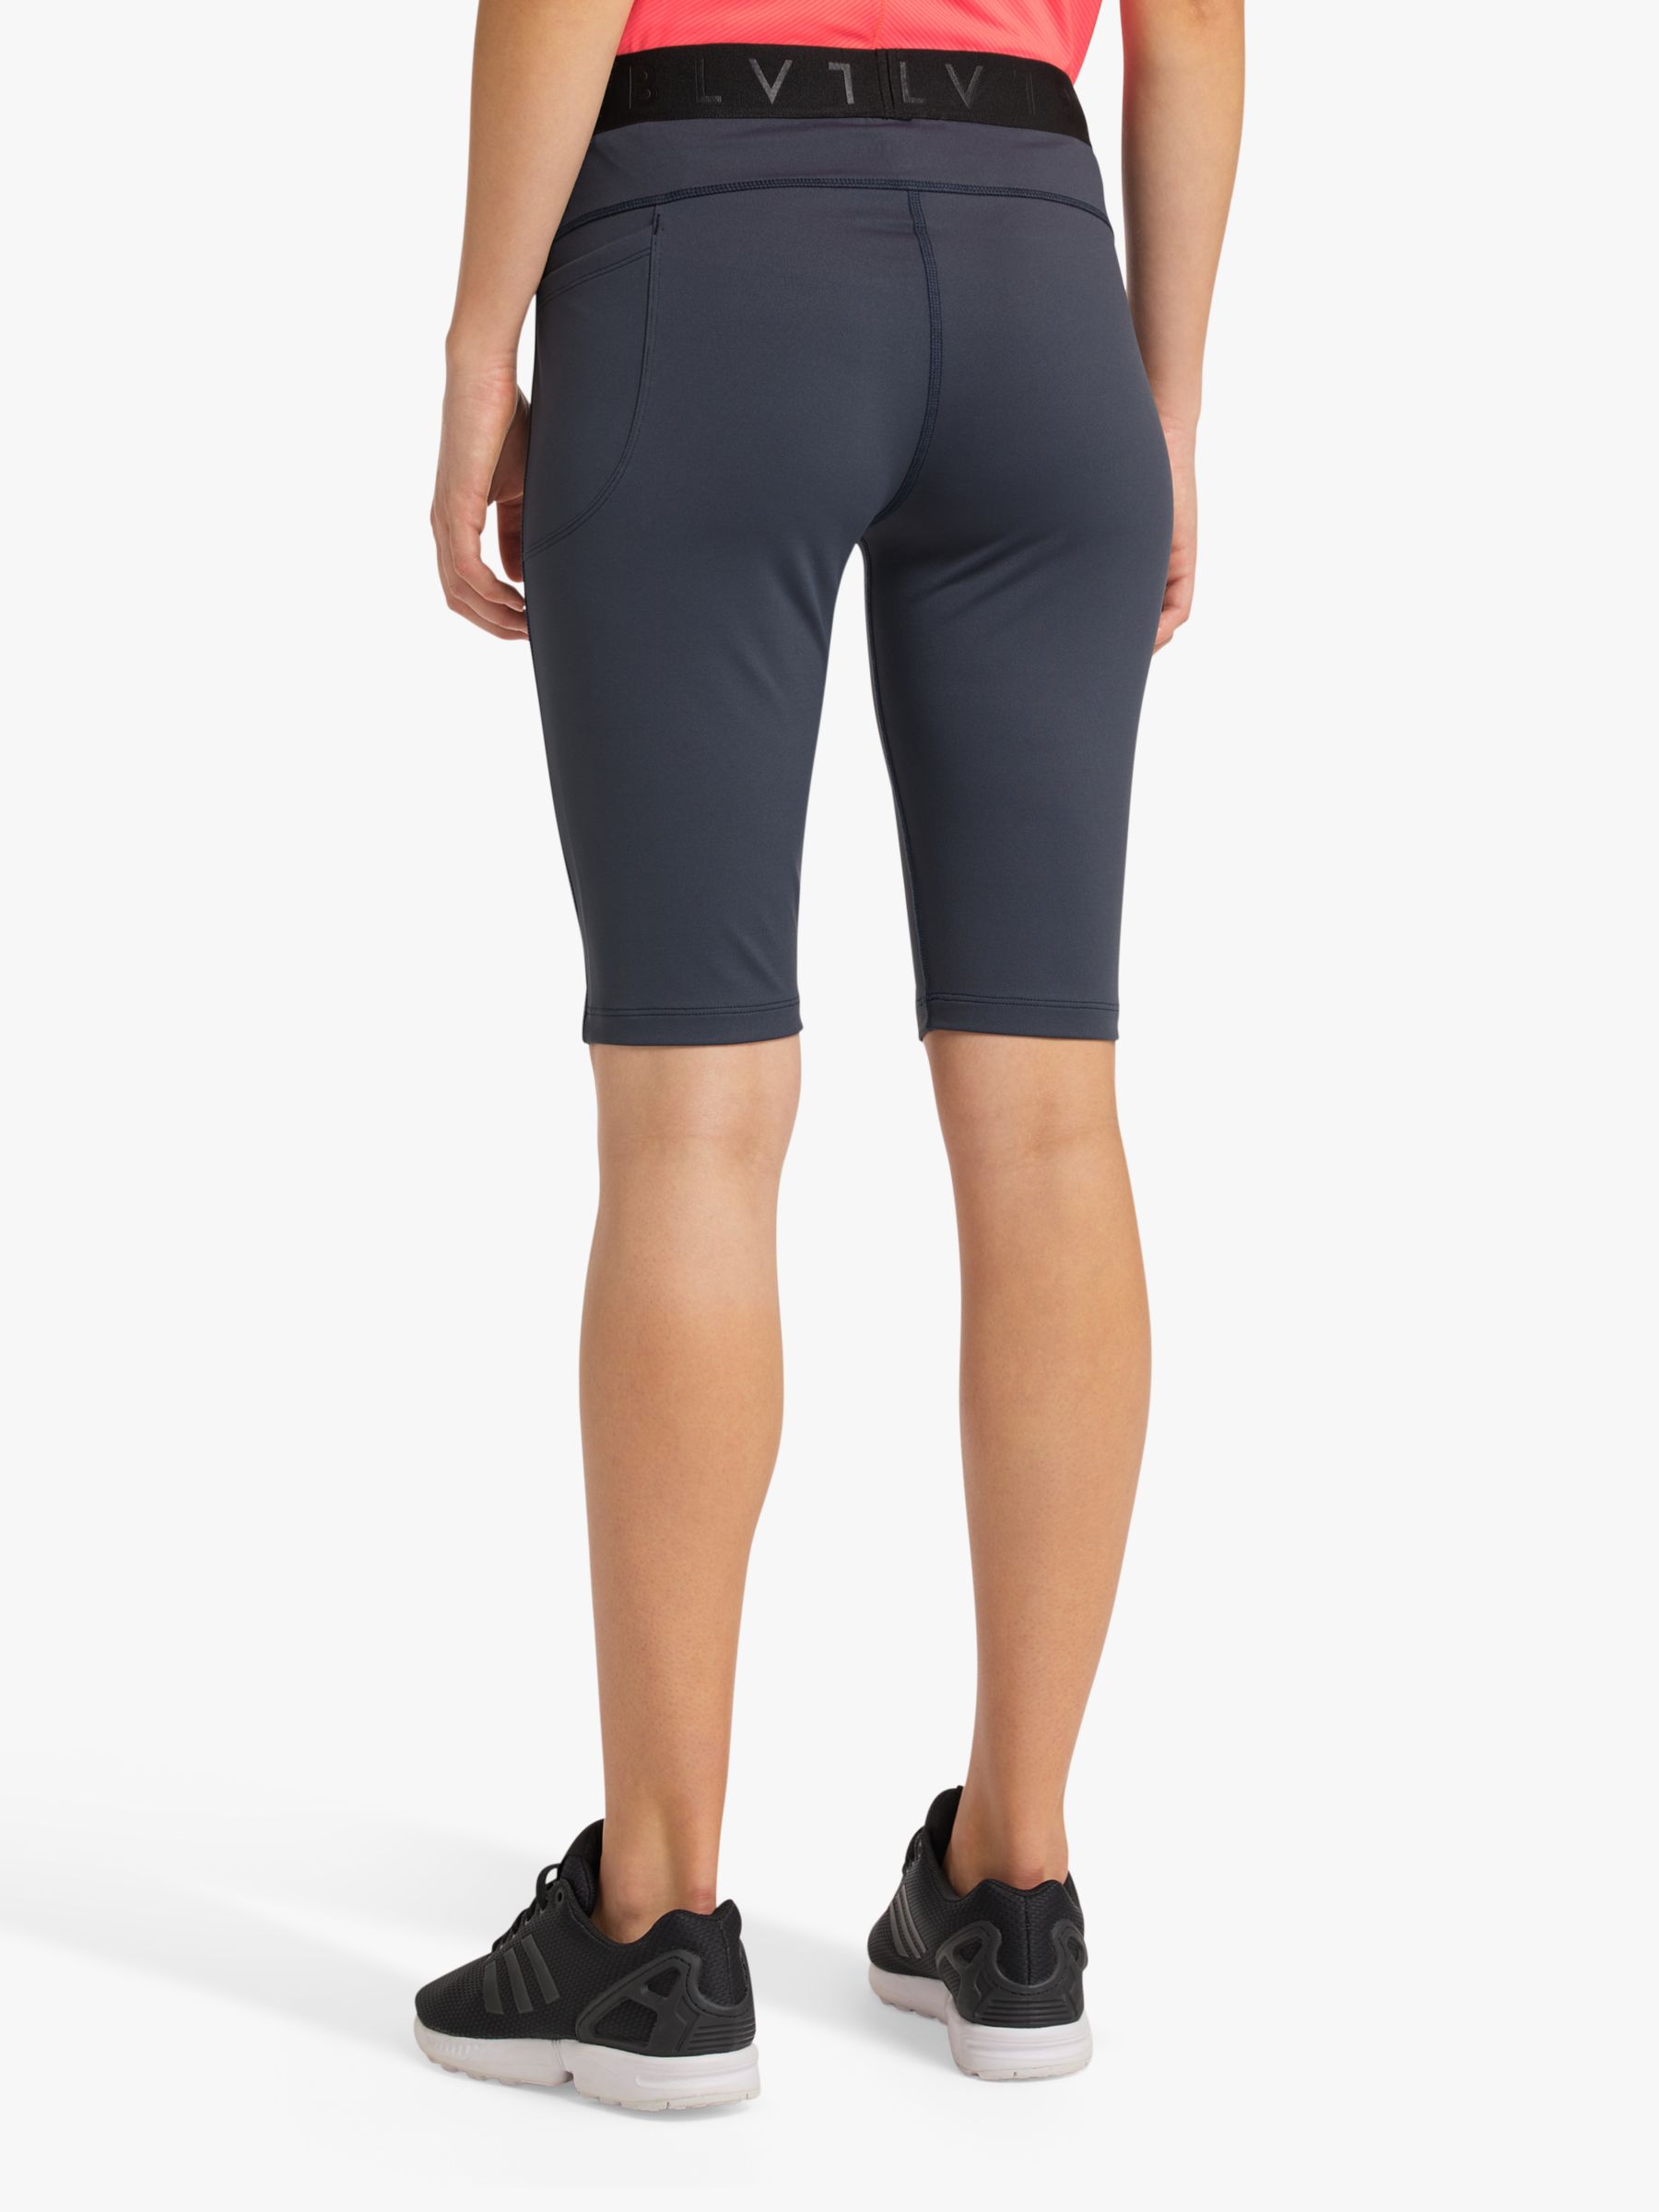 Venice Beach Ally Cycling Shorts, Graphite at John Lewis & Partners